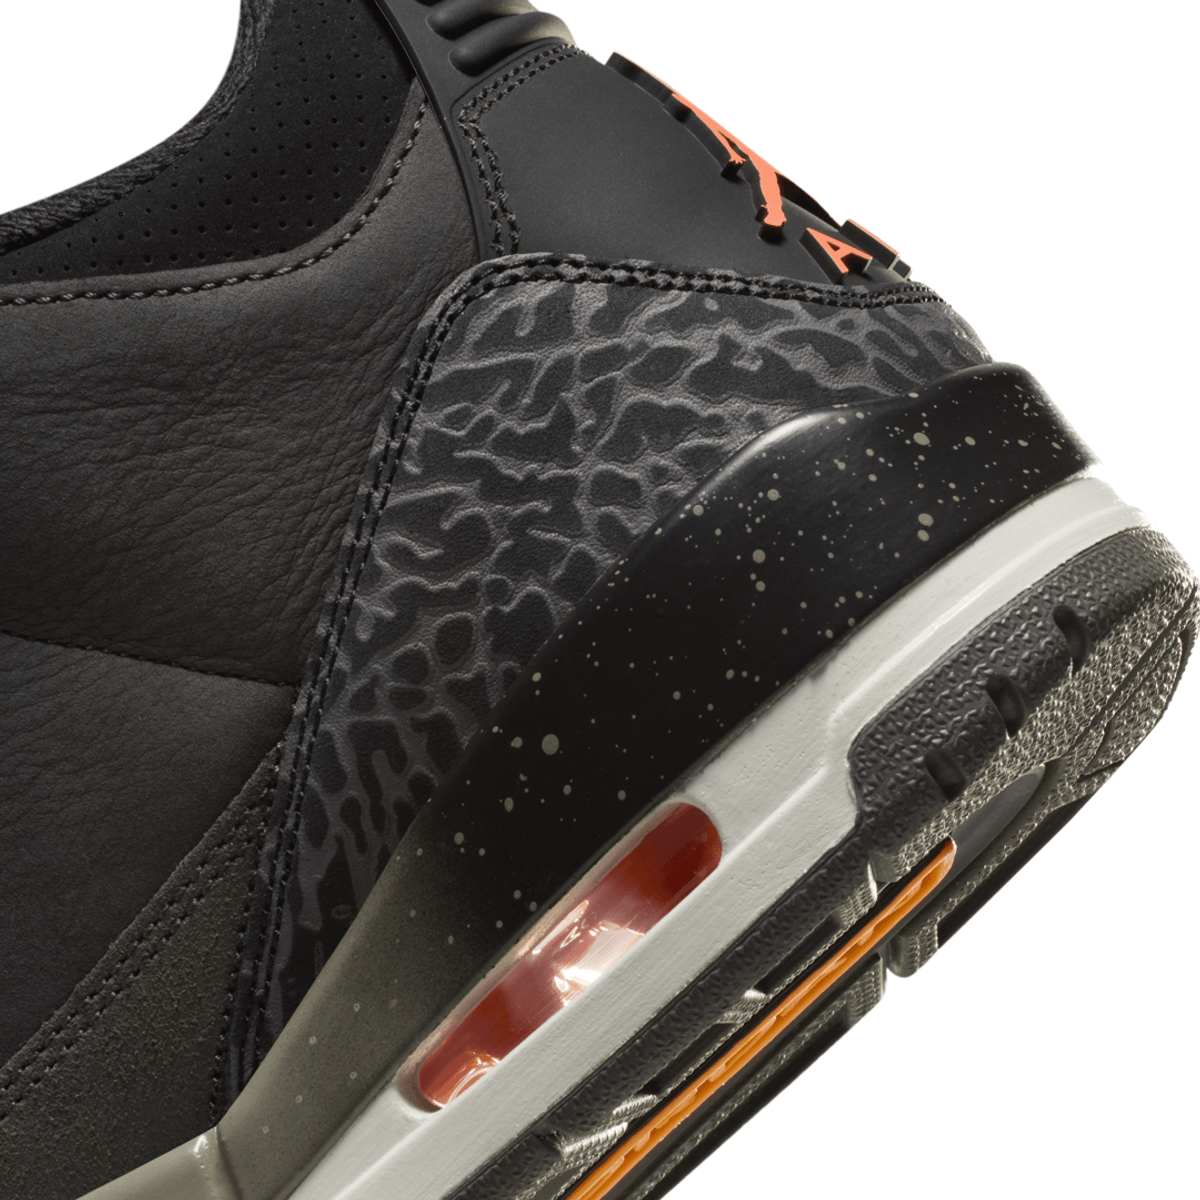 Official Images of The Air Jordan 3 Fear